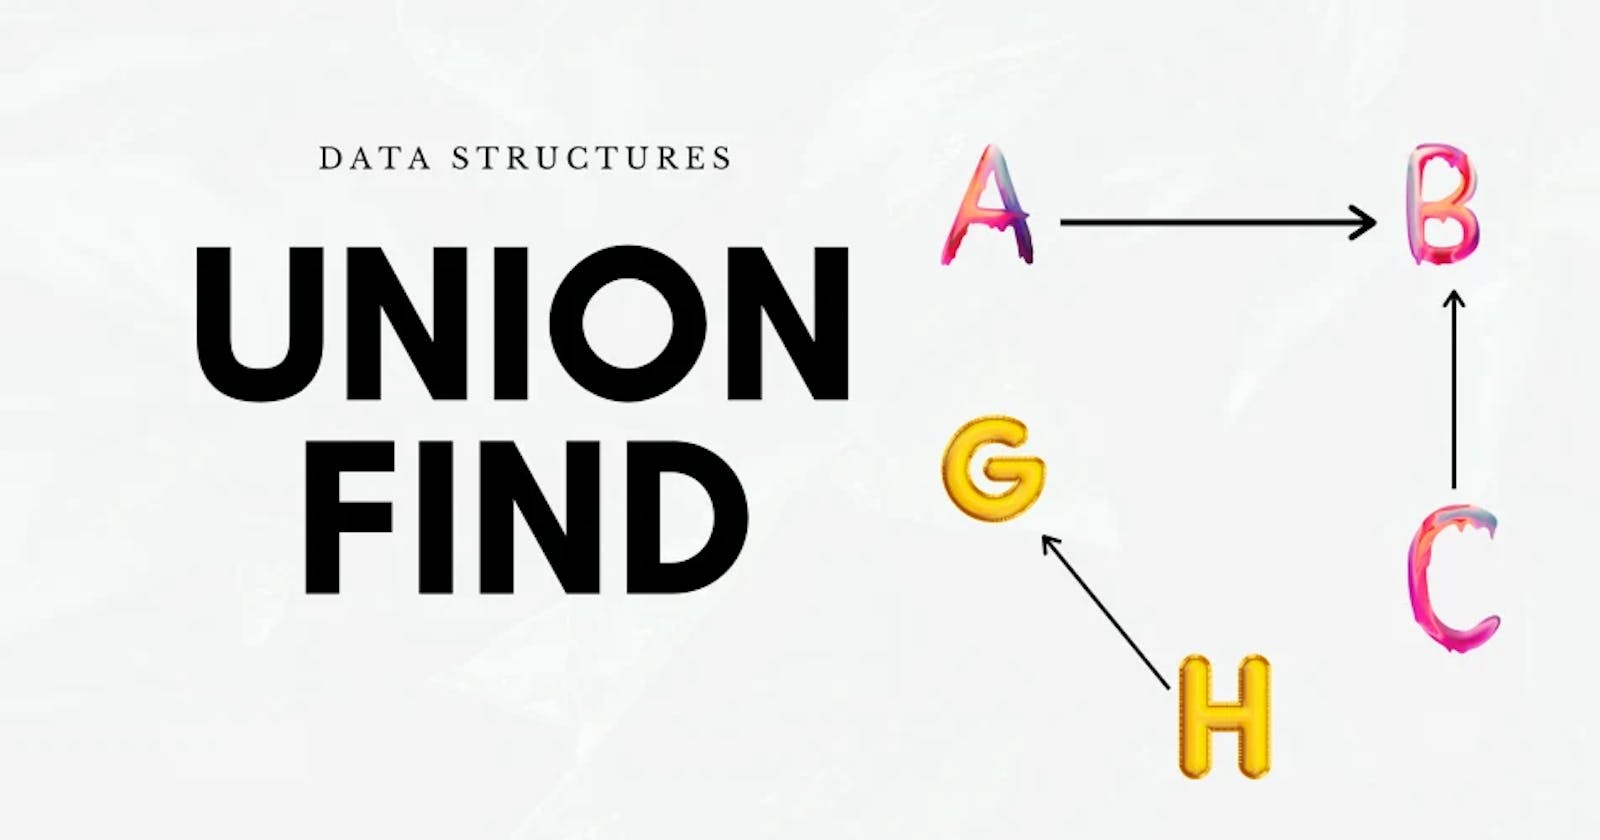 Data Structure to find the connection between two objects